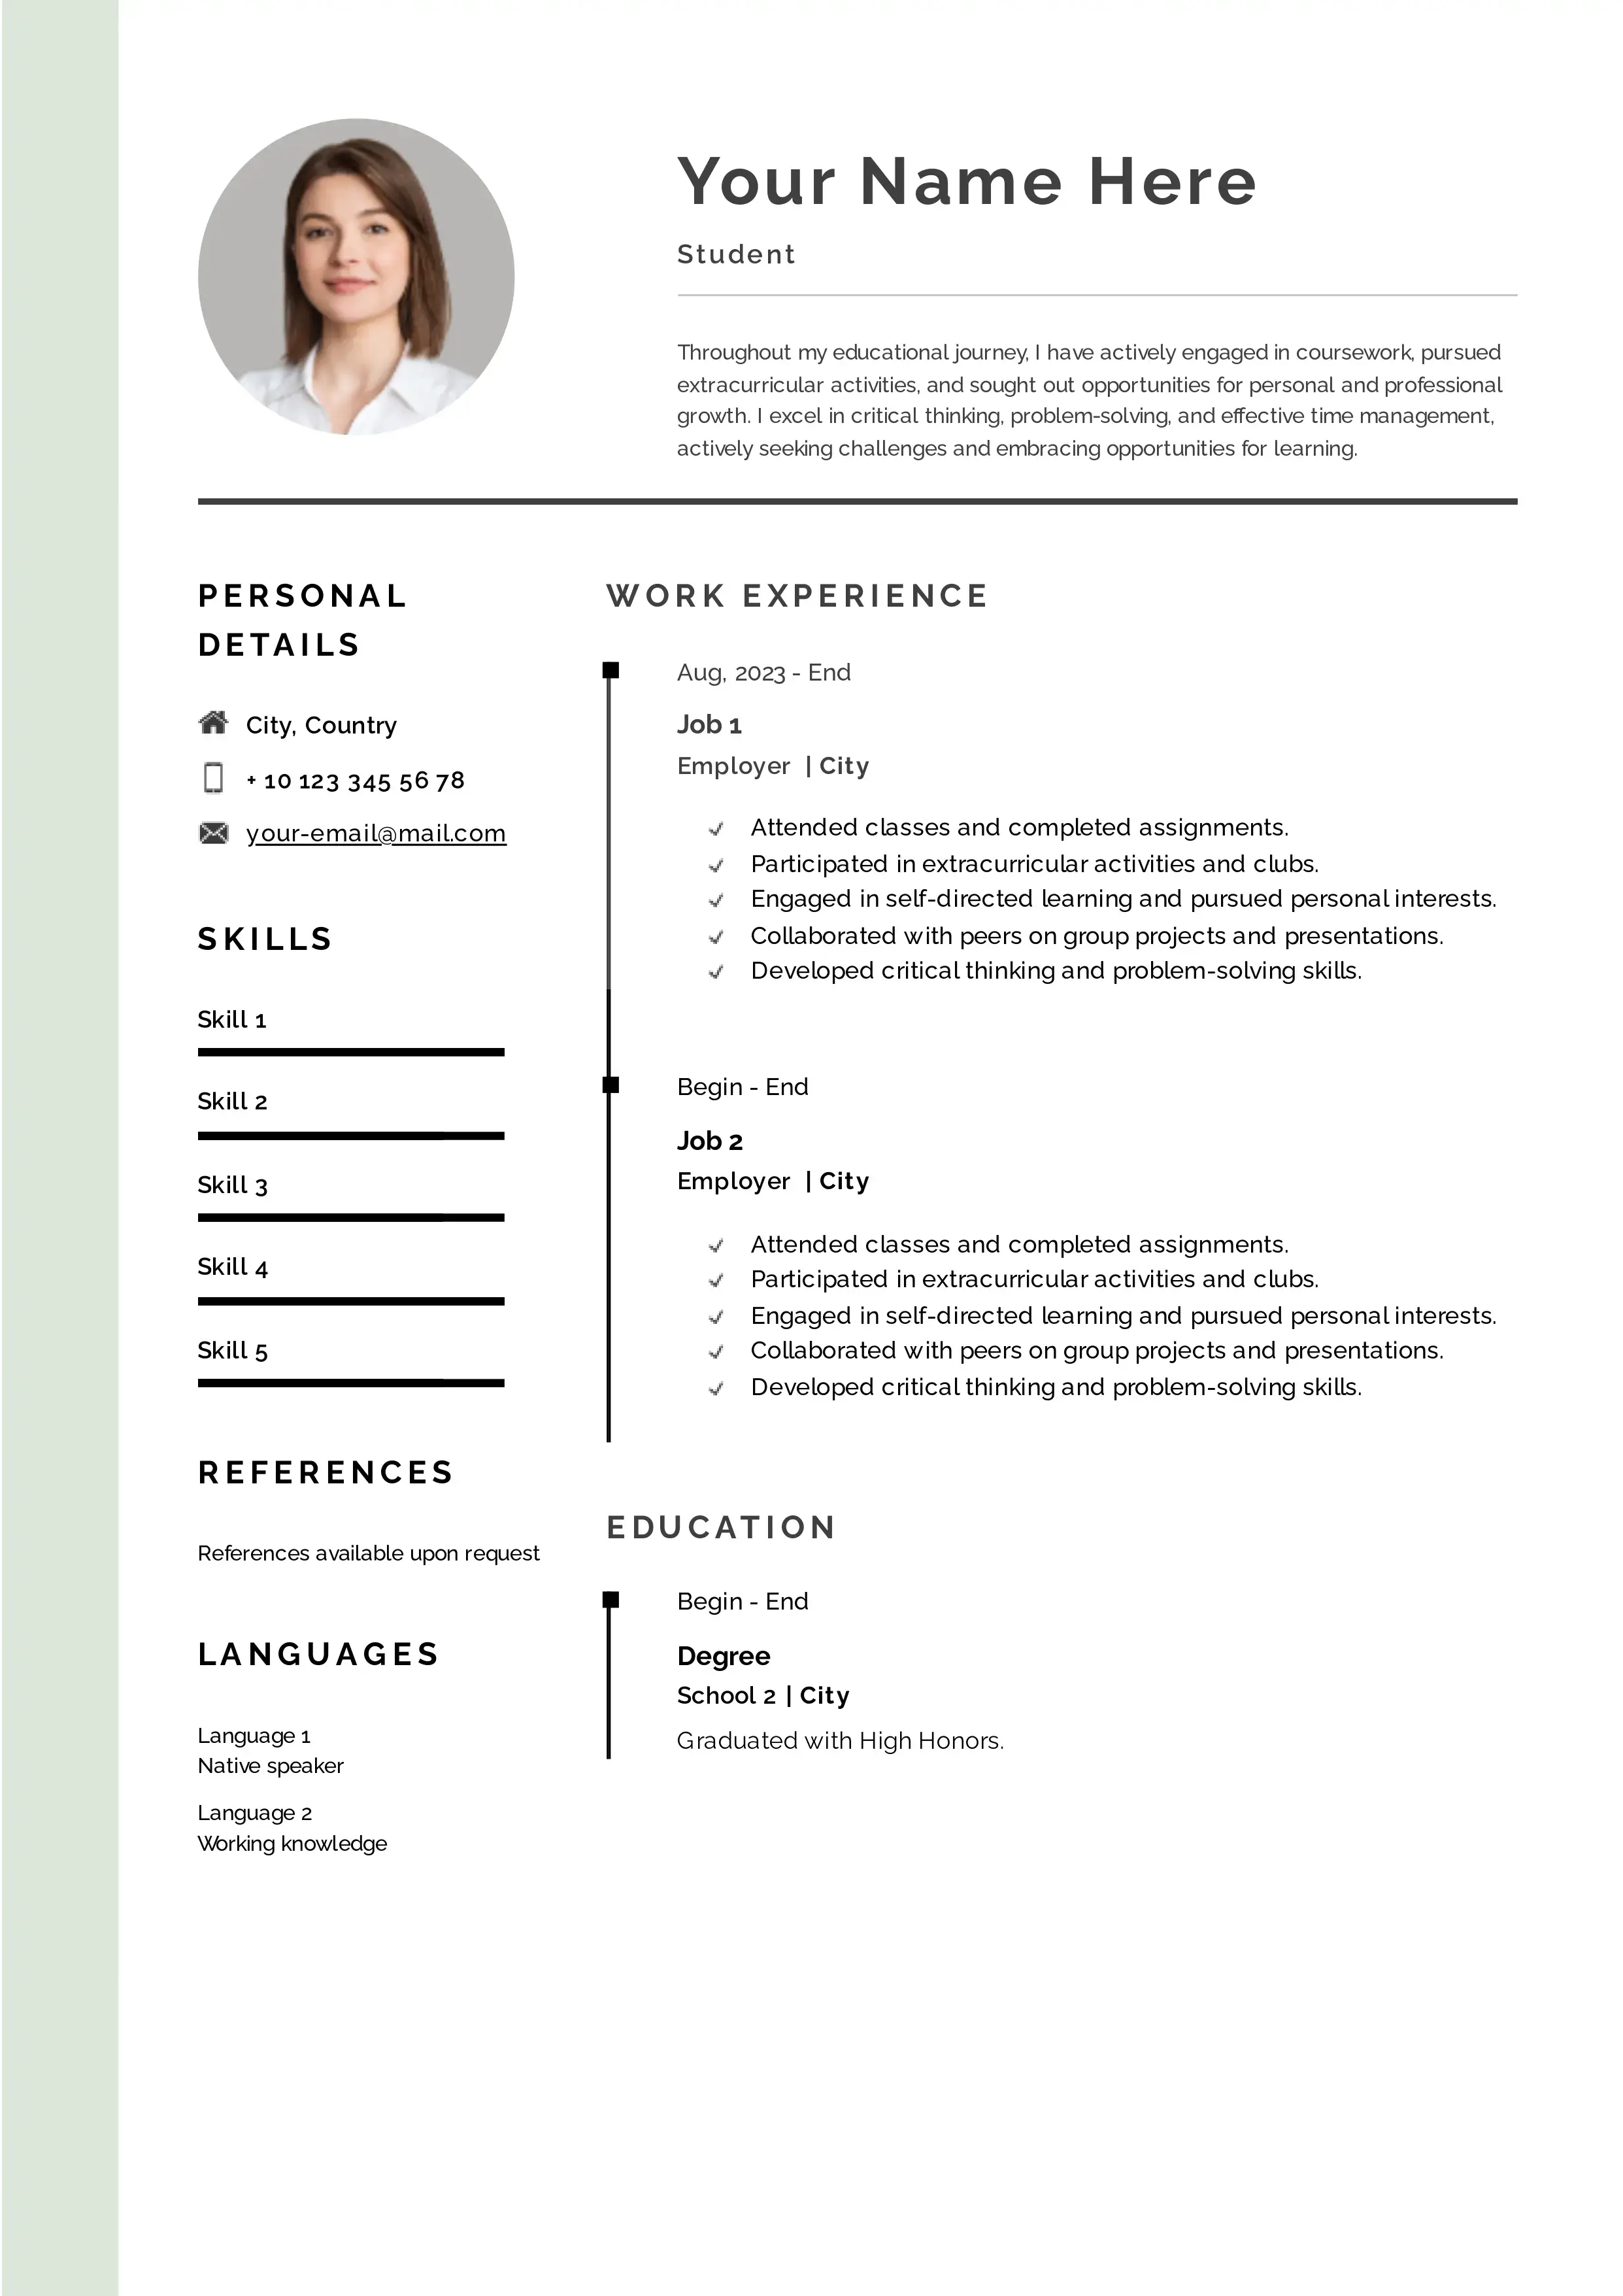 Student resume examples CV